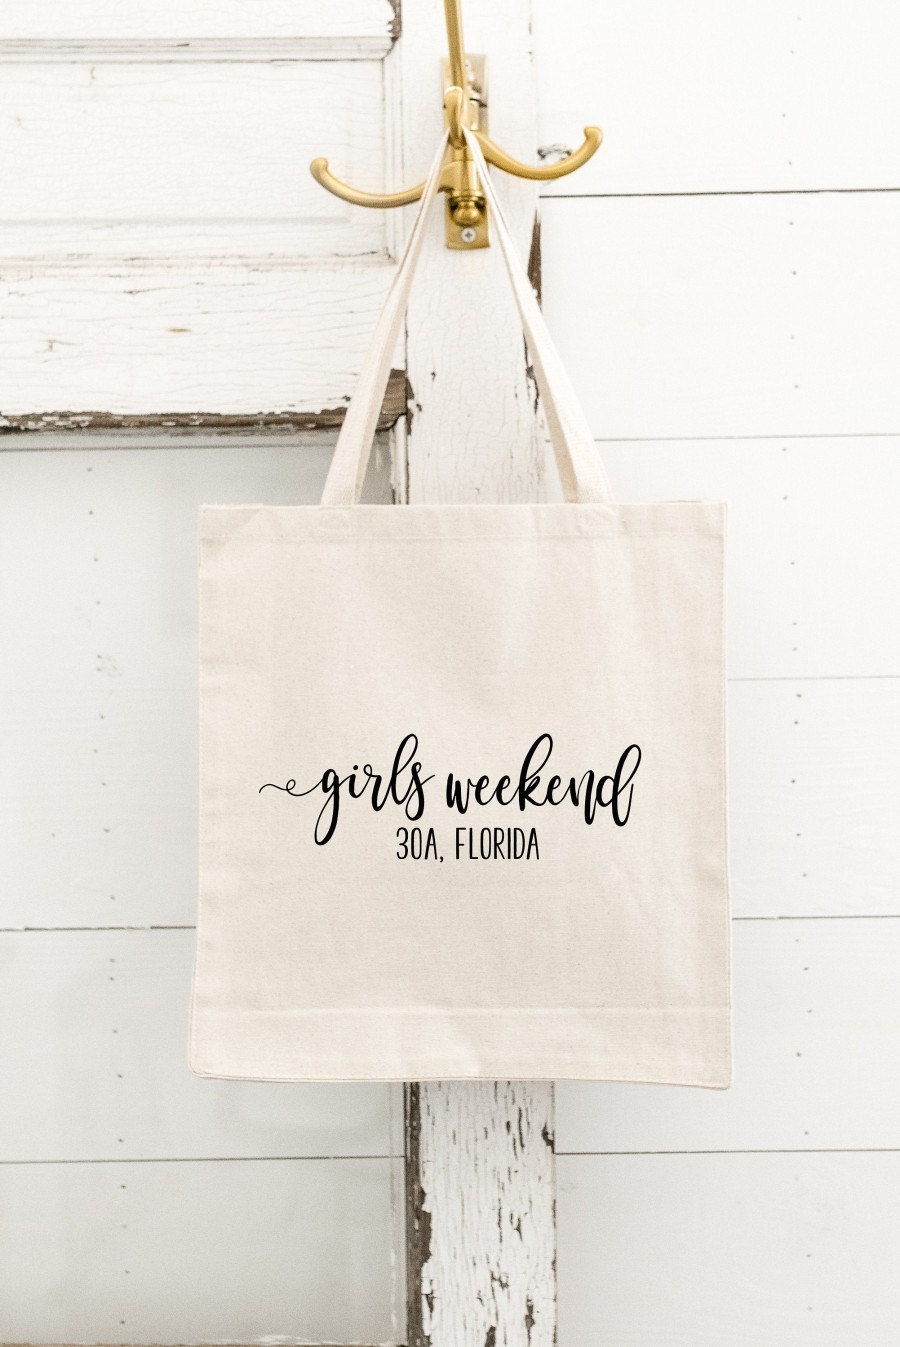 Wedding - Girls Weekend Tote with Location - Girls Wknd - Weekend Tote - Girls Getaway - Girls Trip - Gift - Tote Bag - Weekend Trip - Girls Weekend